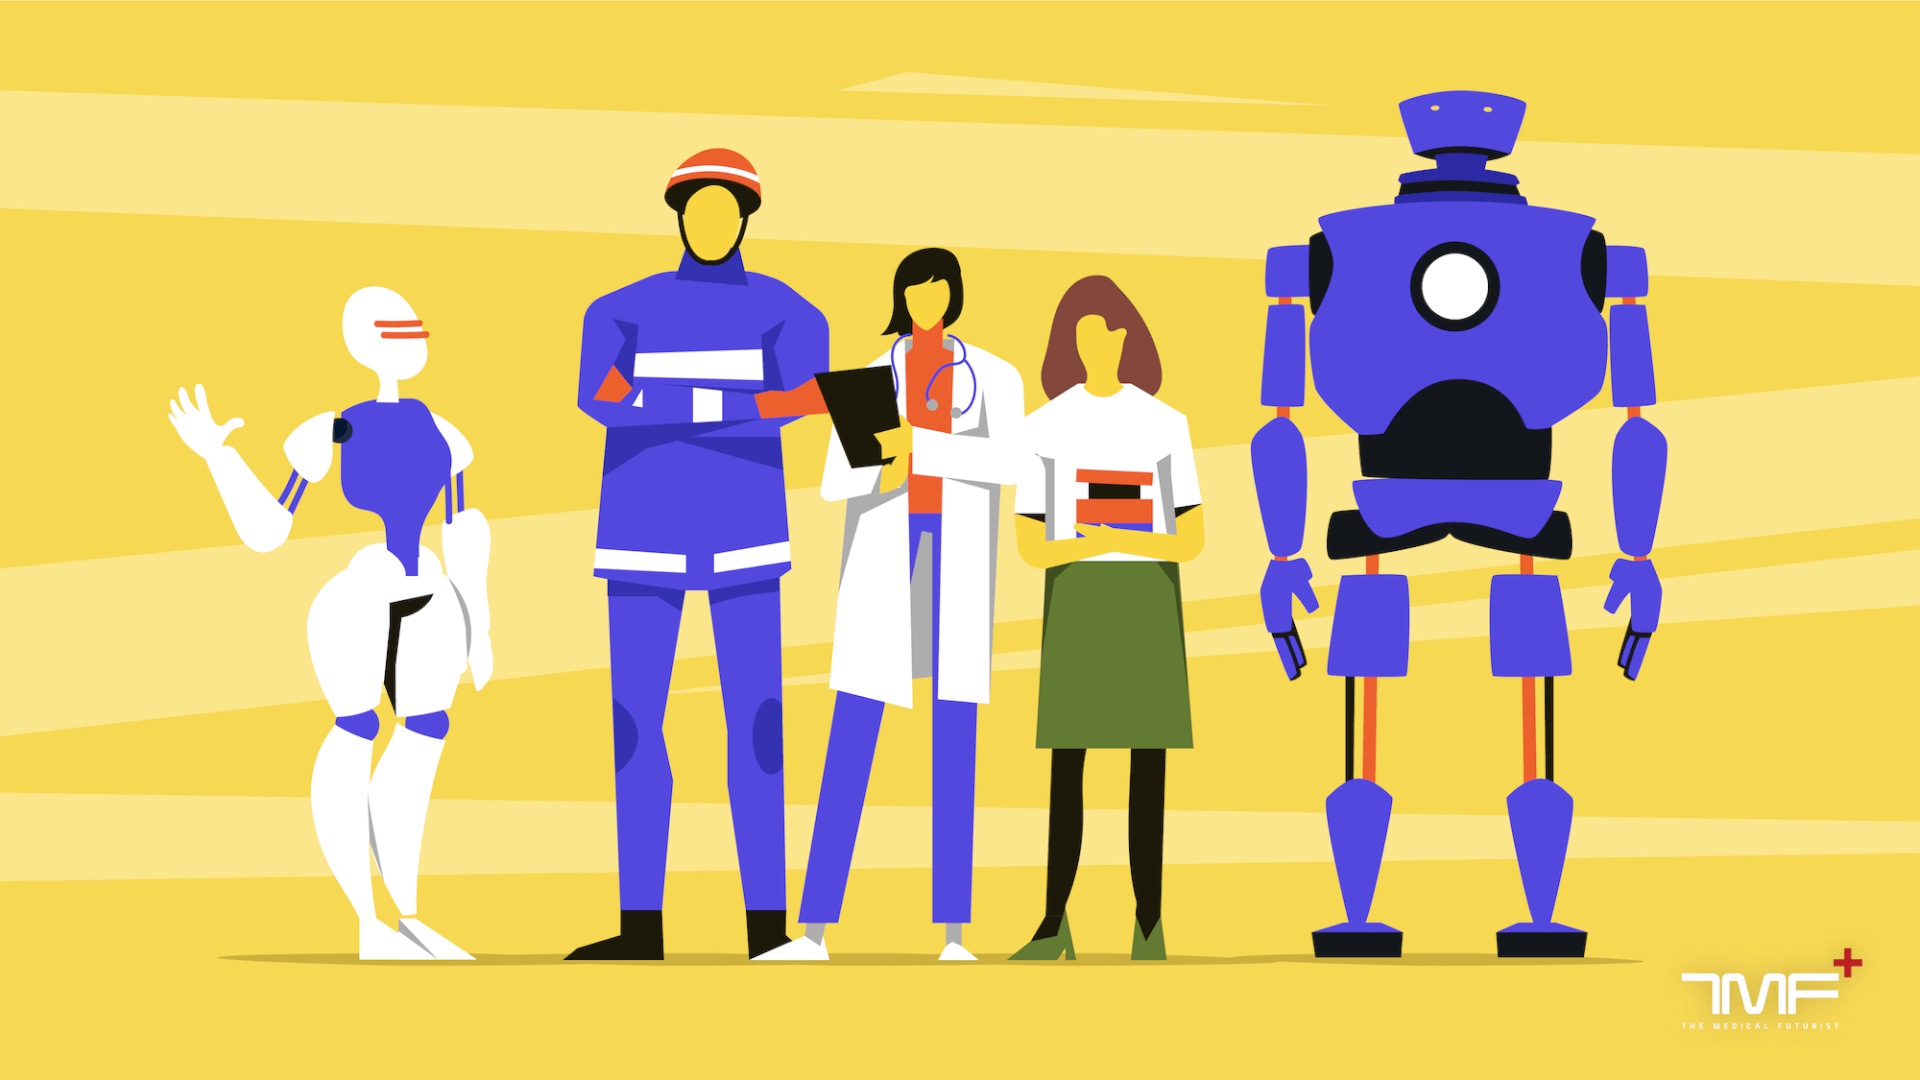 From Organ Designers To Telesurgery VR Planners: Healthcare Jobs in 2040